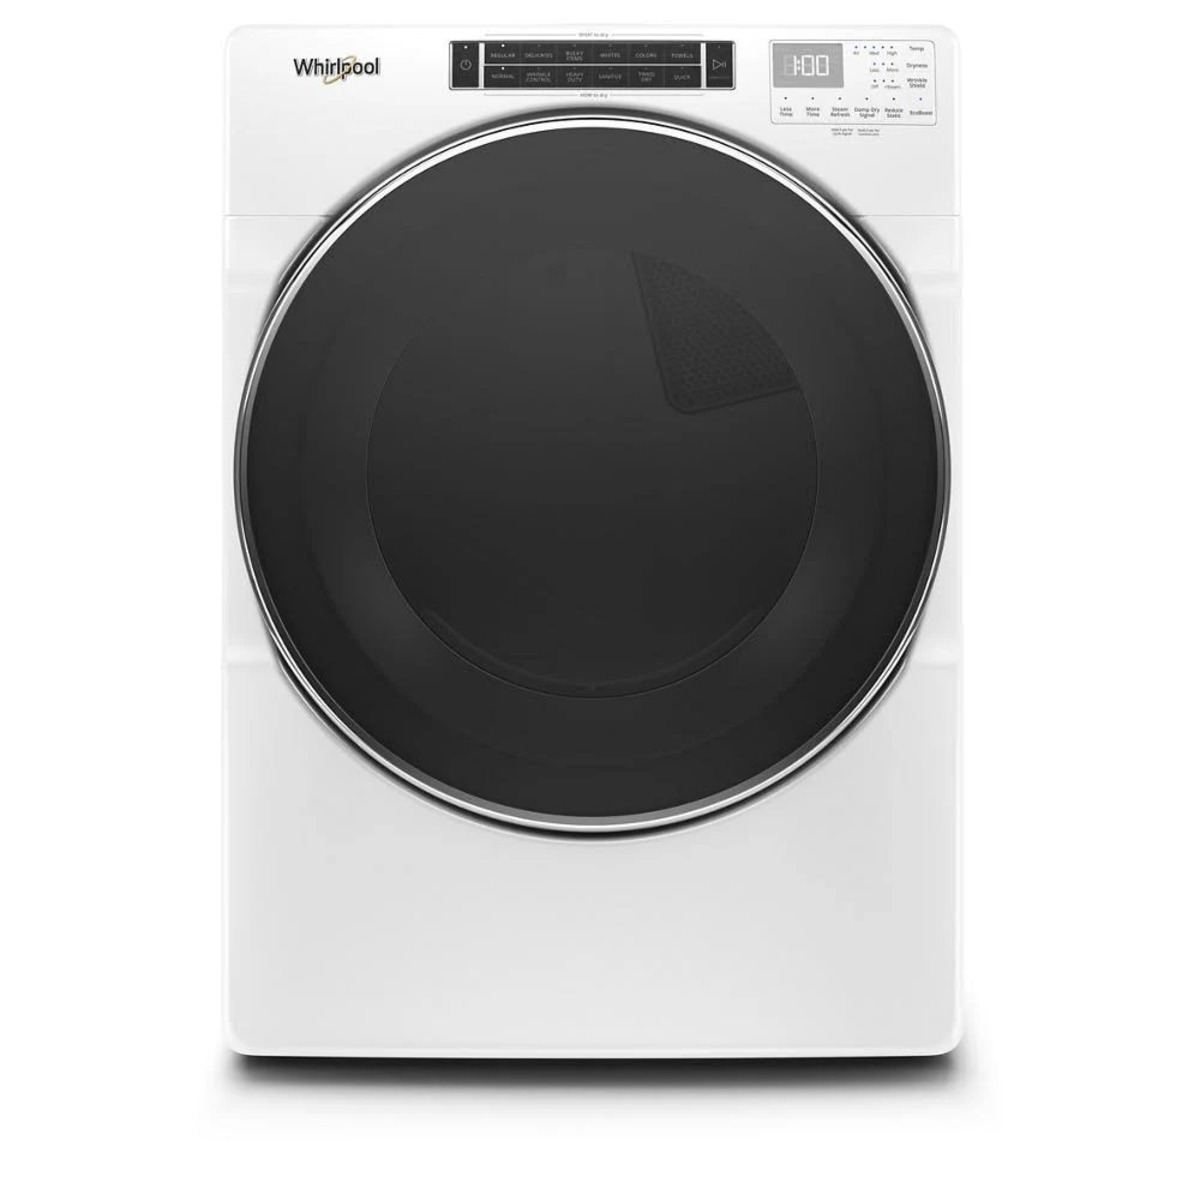 How To Fix The Error Code F75 For Whirlpool Dryer